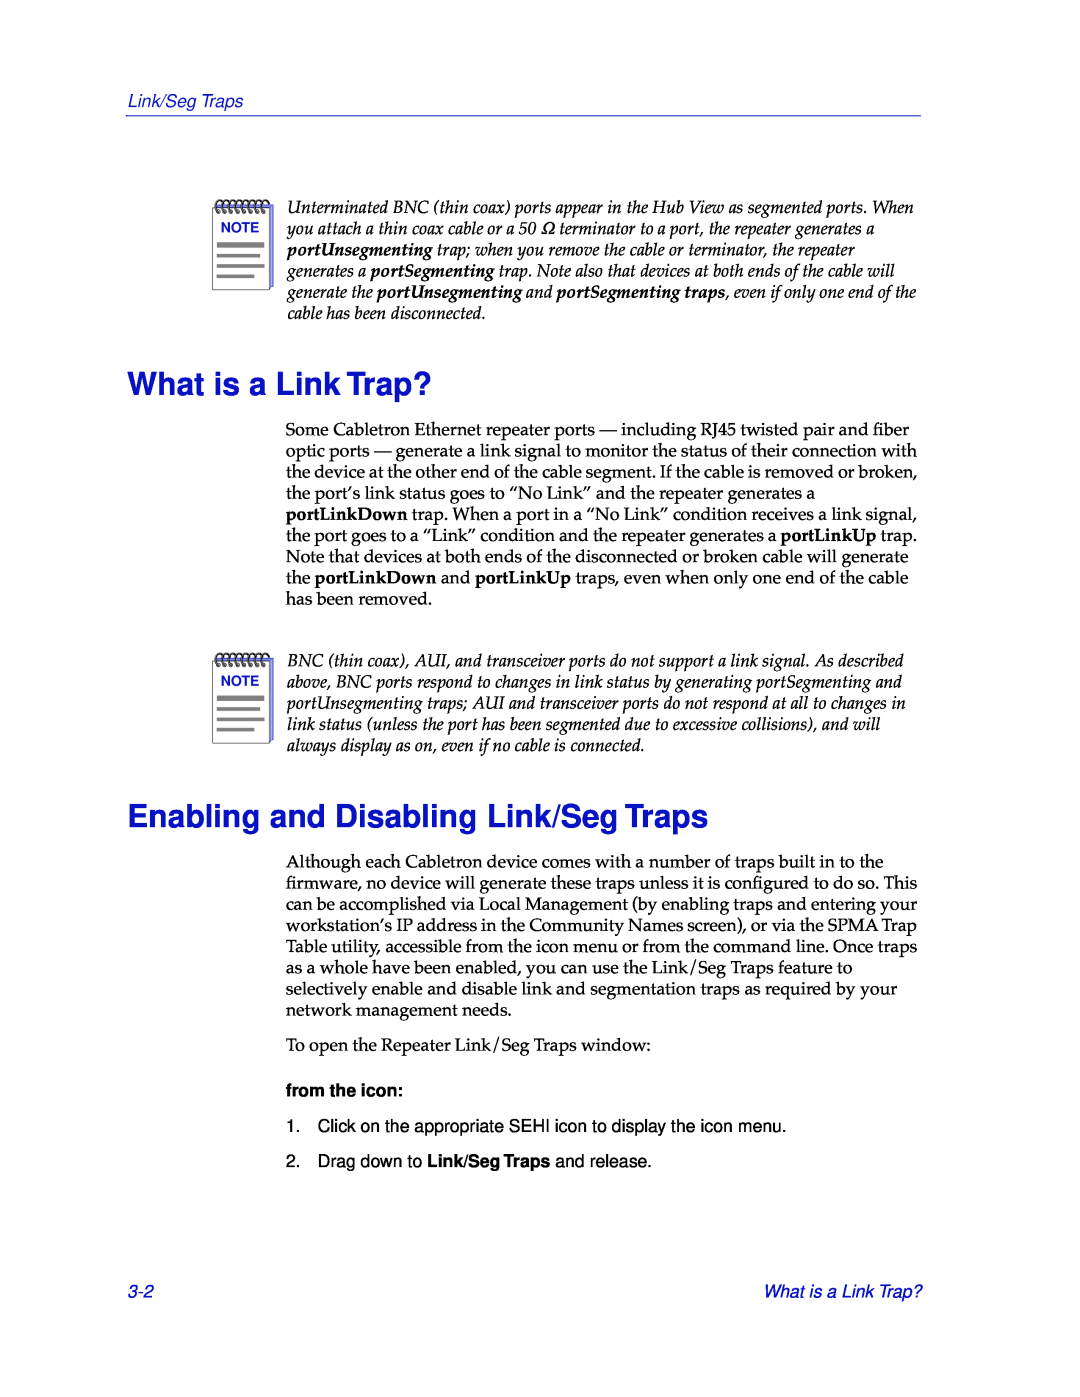 Cabletron Systems SEHI-32/34, SEHI-22/24 manual What is a Link Trap?, Enabling and Disabling Link/Seg Traps, from the icon 